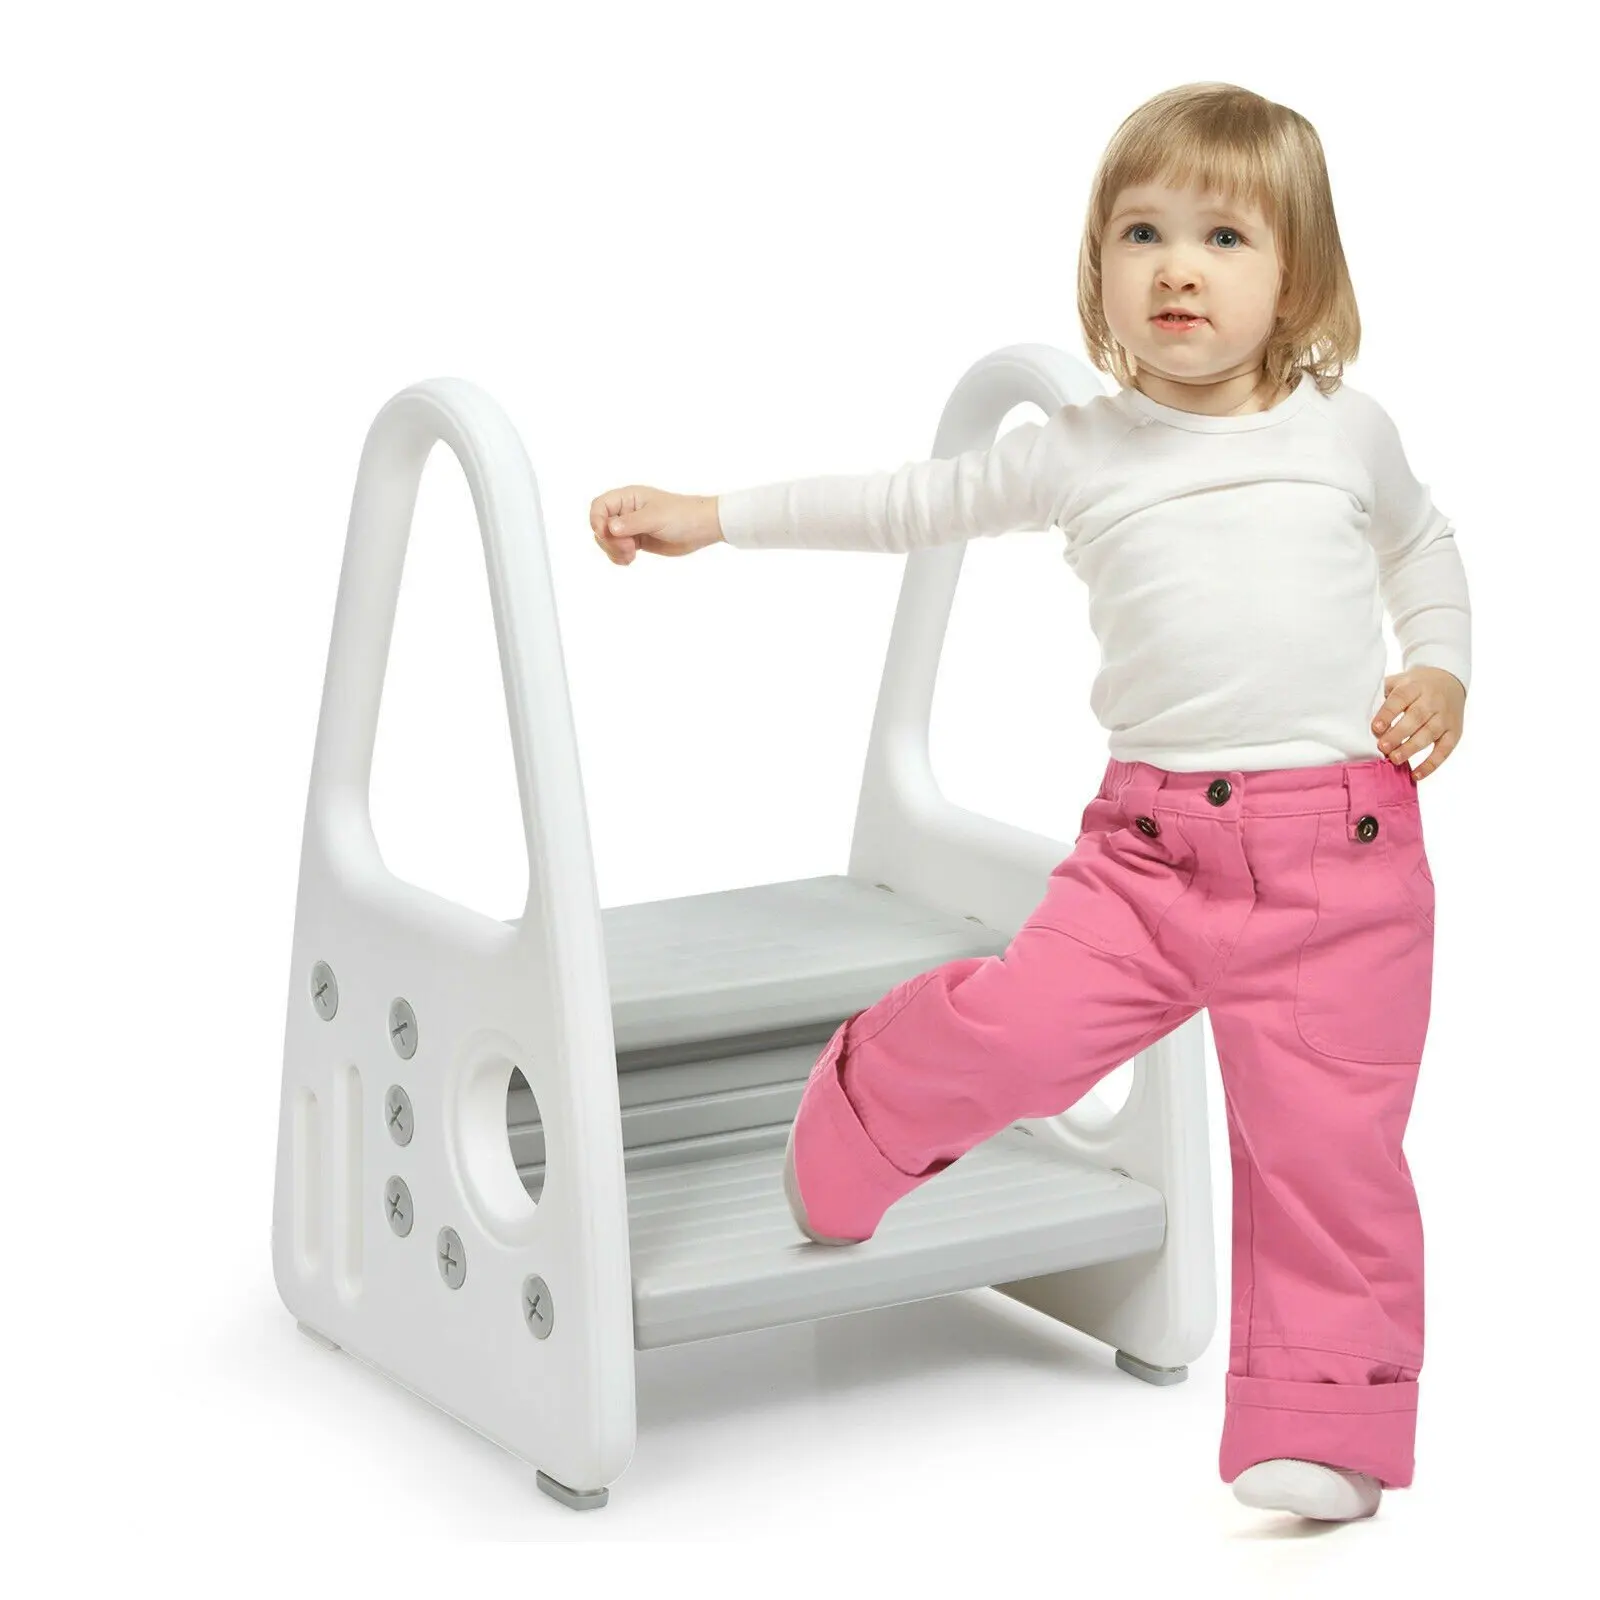 Amazon Hot Sell Kids Stepping Stool Kitchen Helper Step Stool Bathroom 2 Step Stool with Handle for Children